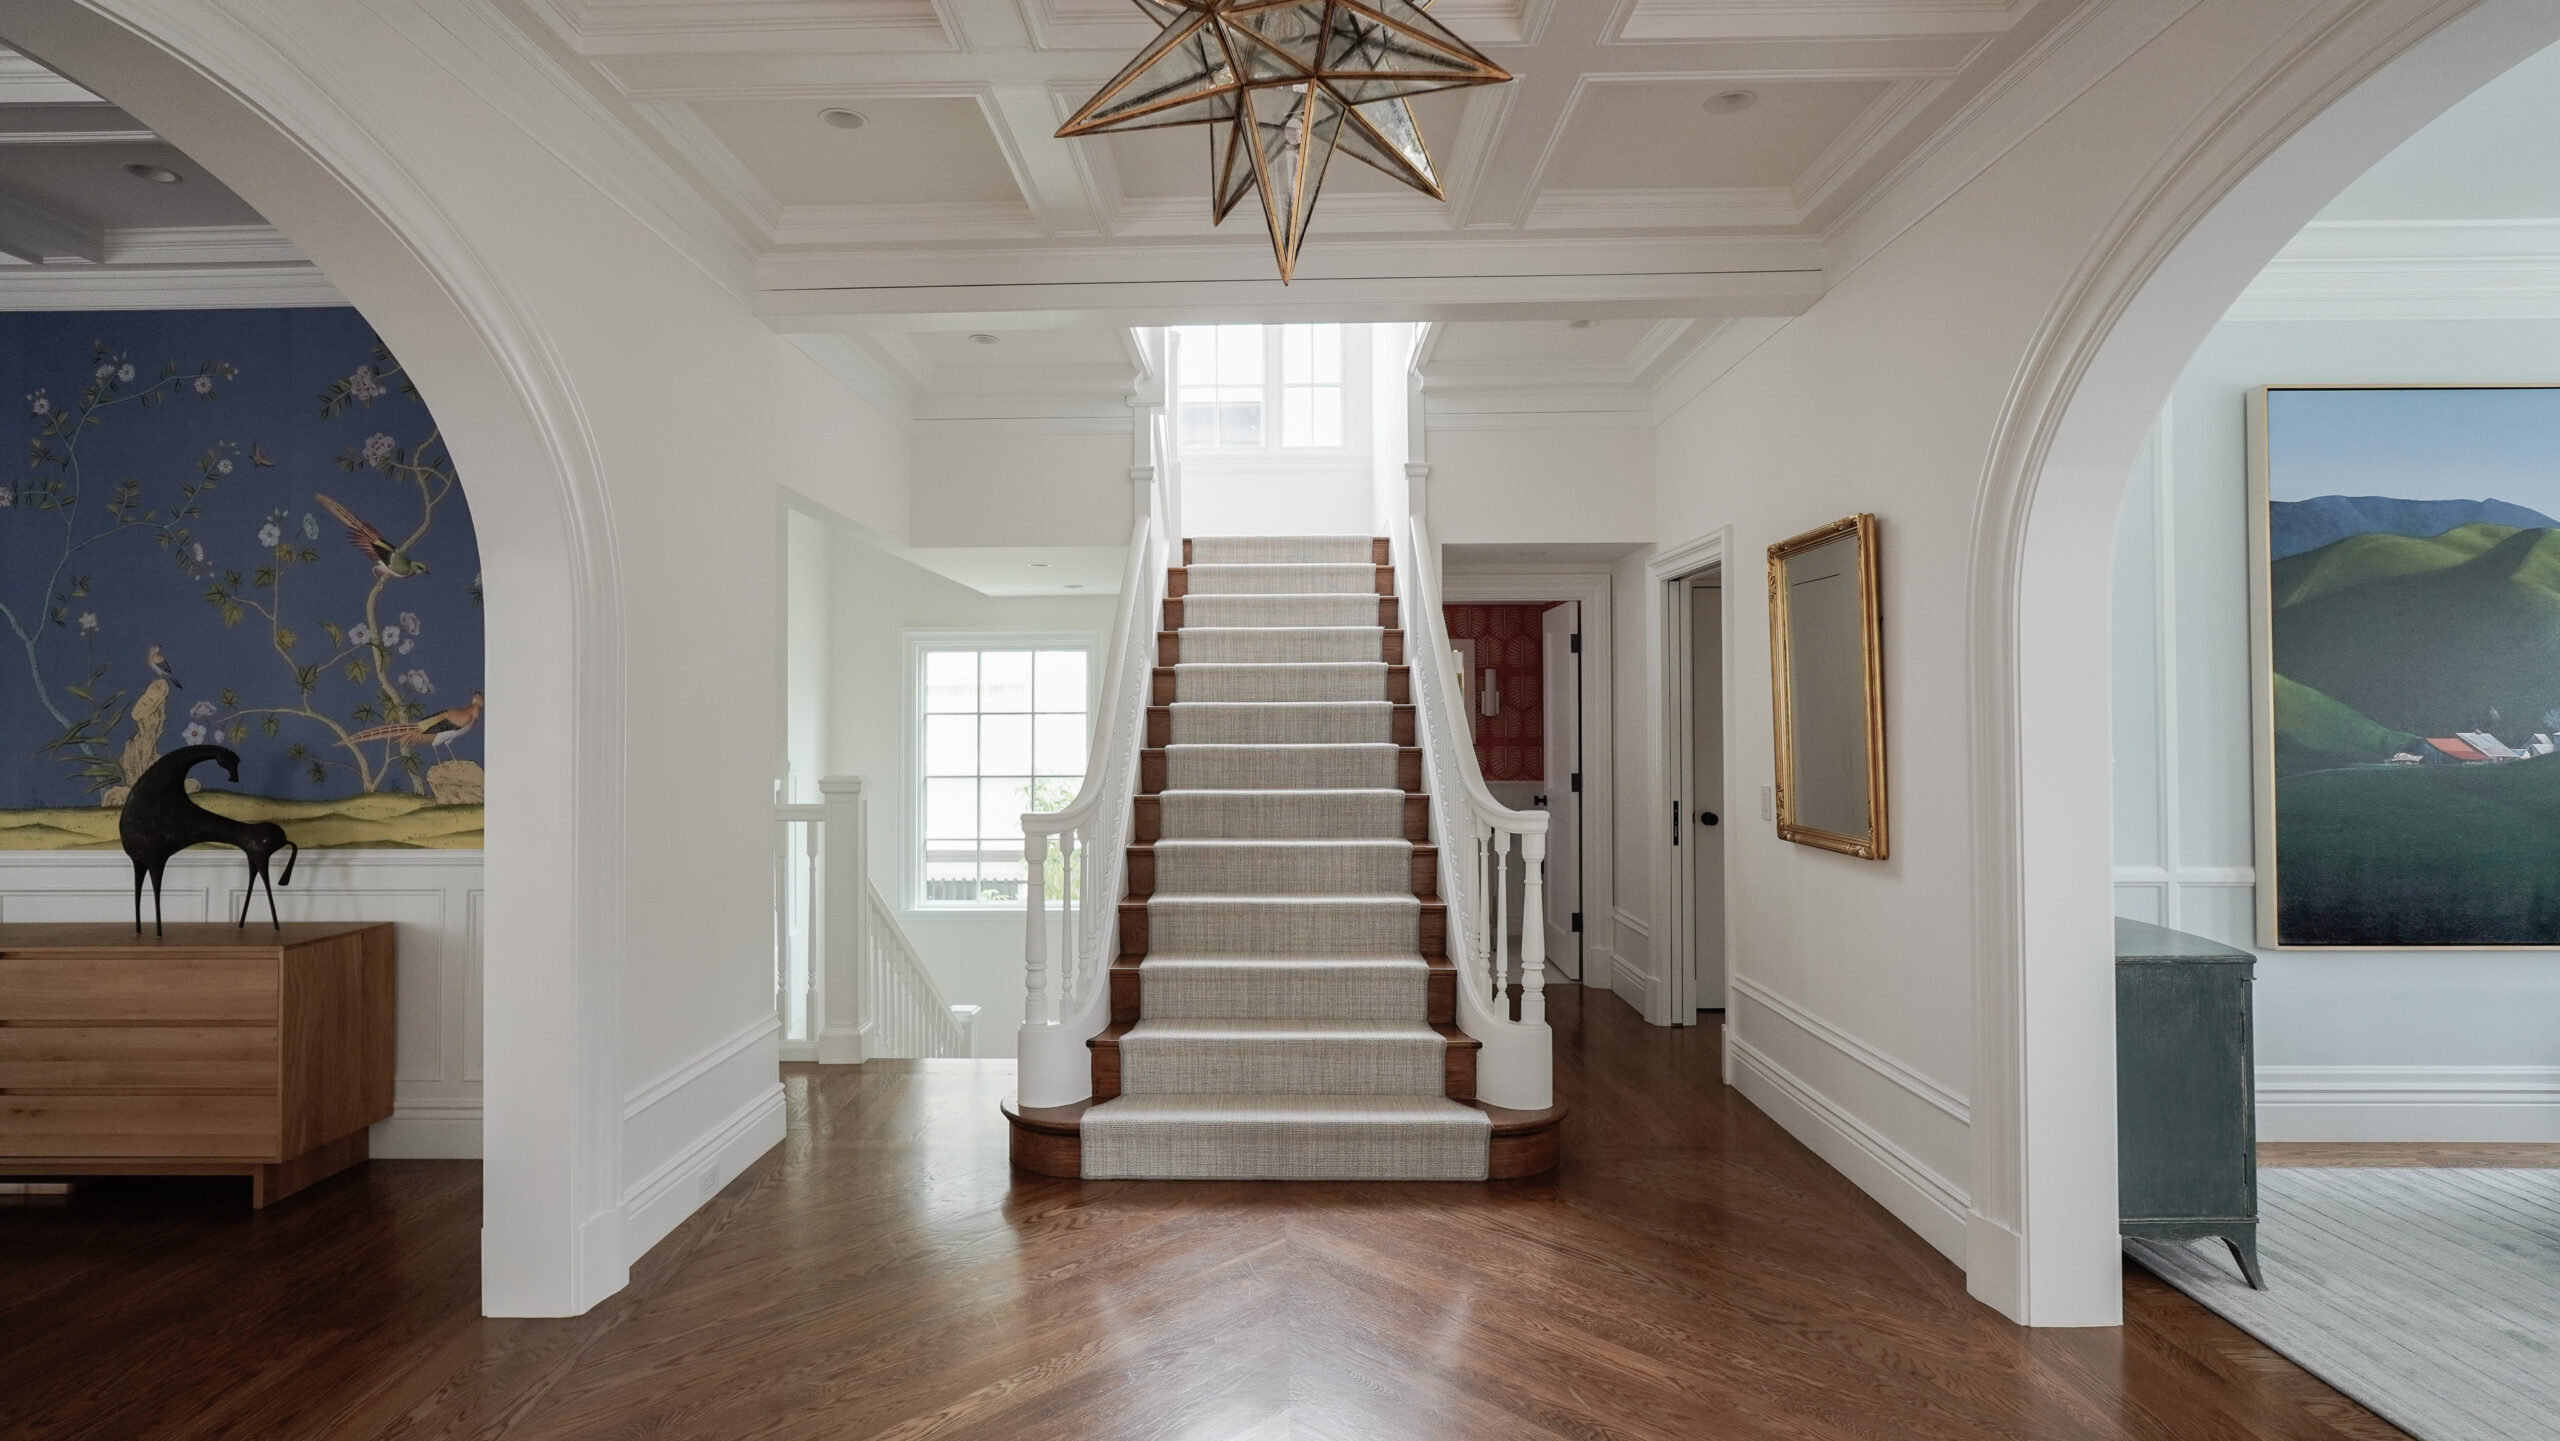 Large bright foyer with central staircase.